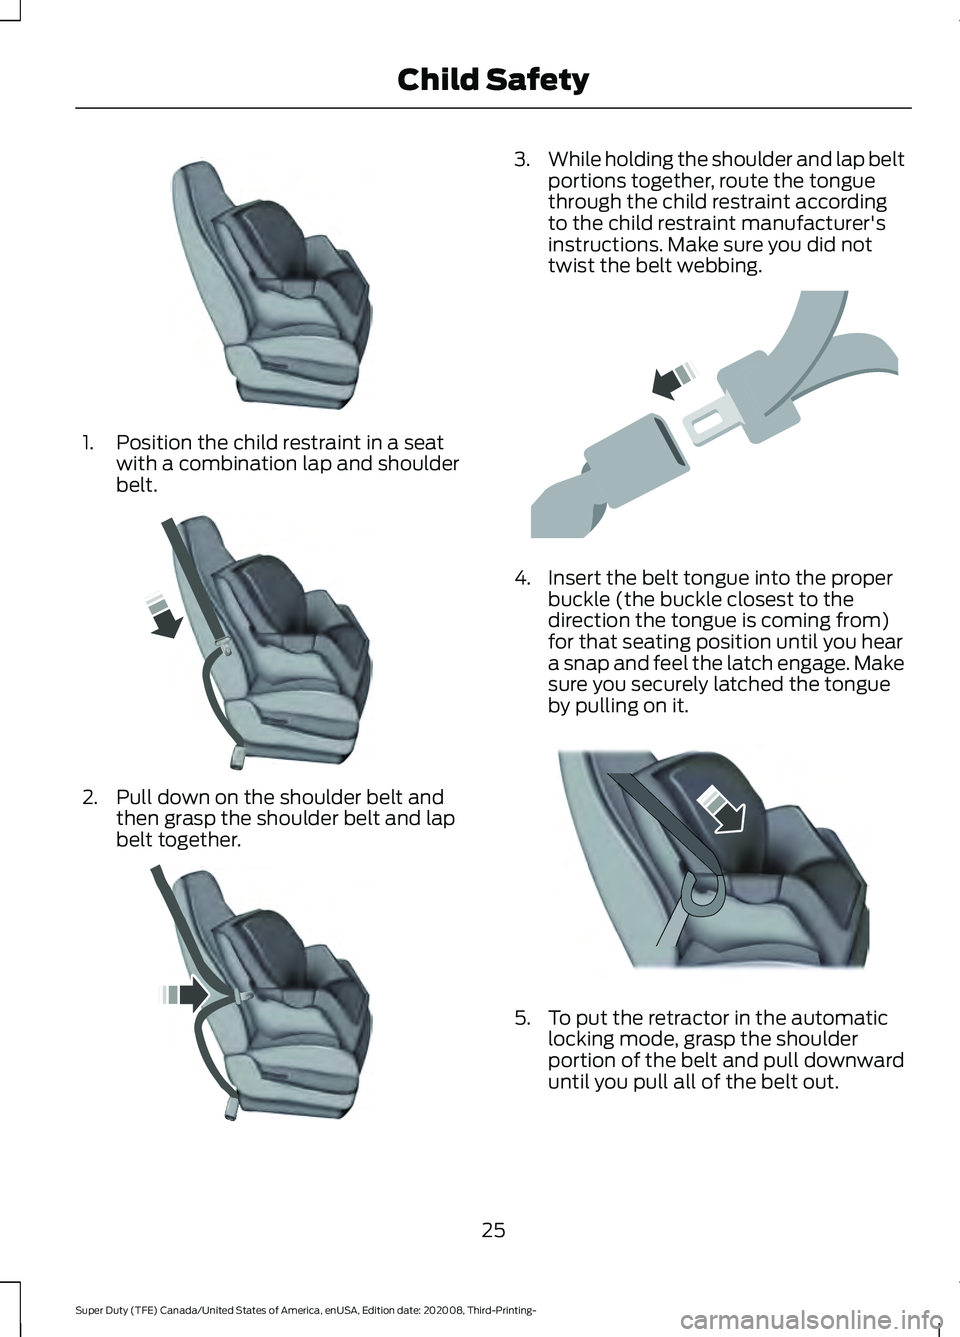 FORD F-450 2021  Owners Manual 1. Position the child restraint in a seat
with a combination lap and shoulder
belt. 2. Pull down on the shoulder belt and
then grasp the shoulder belt and lap
belt together. 3.
While holding the shoul